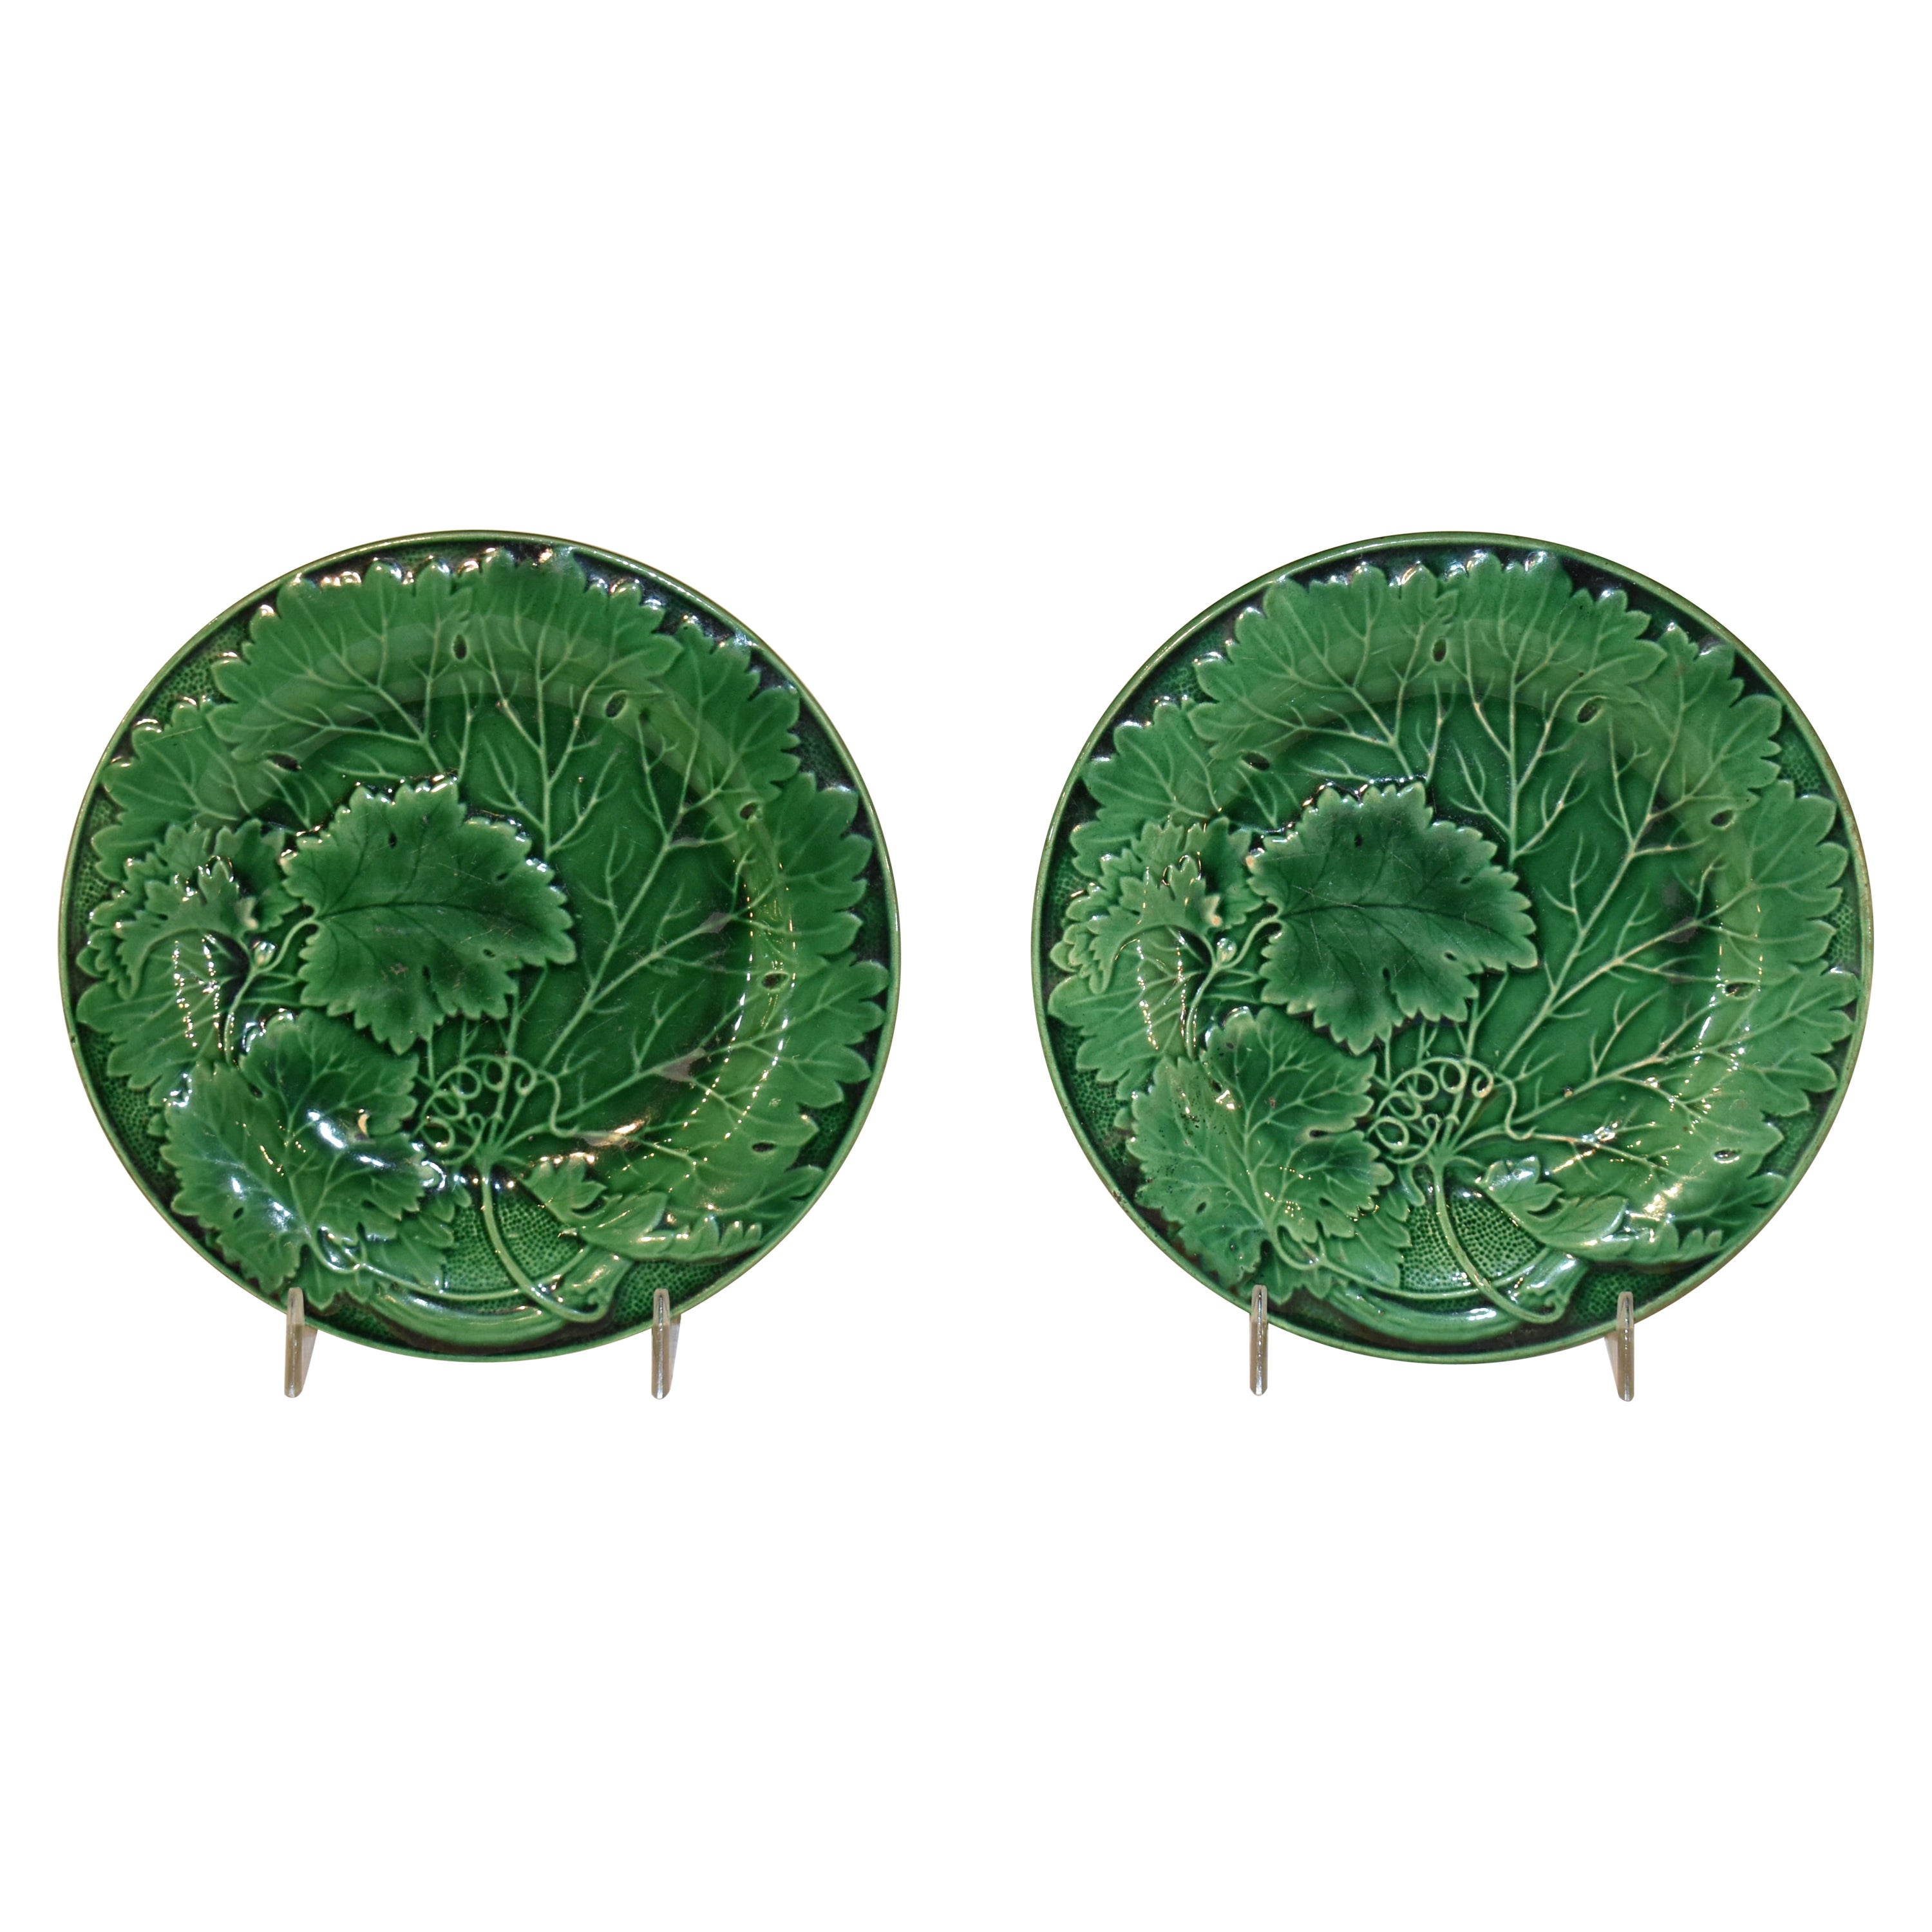 Pair of 19th Century English Majolica Plates For Sale